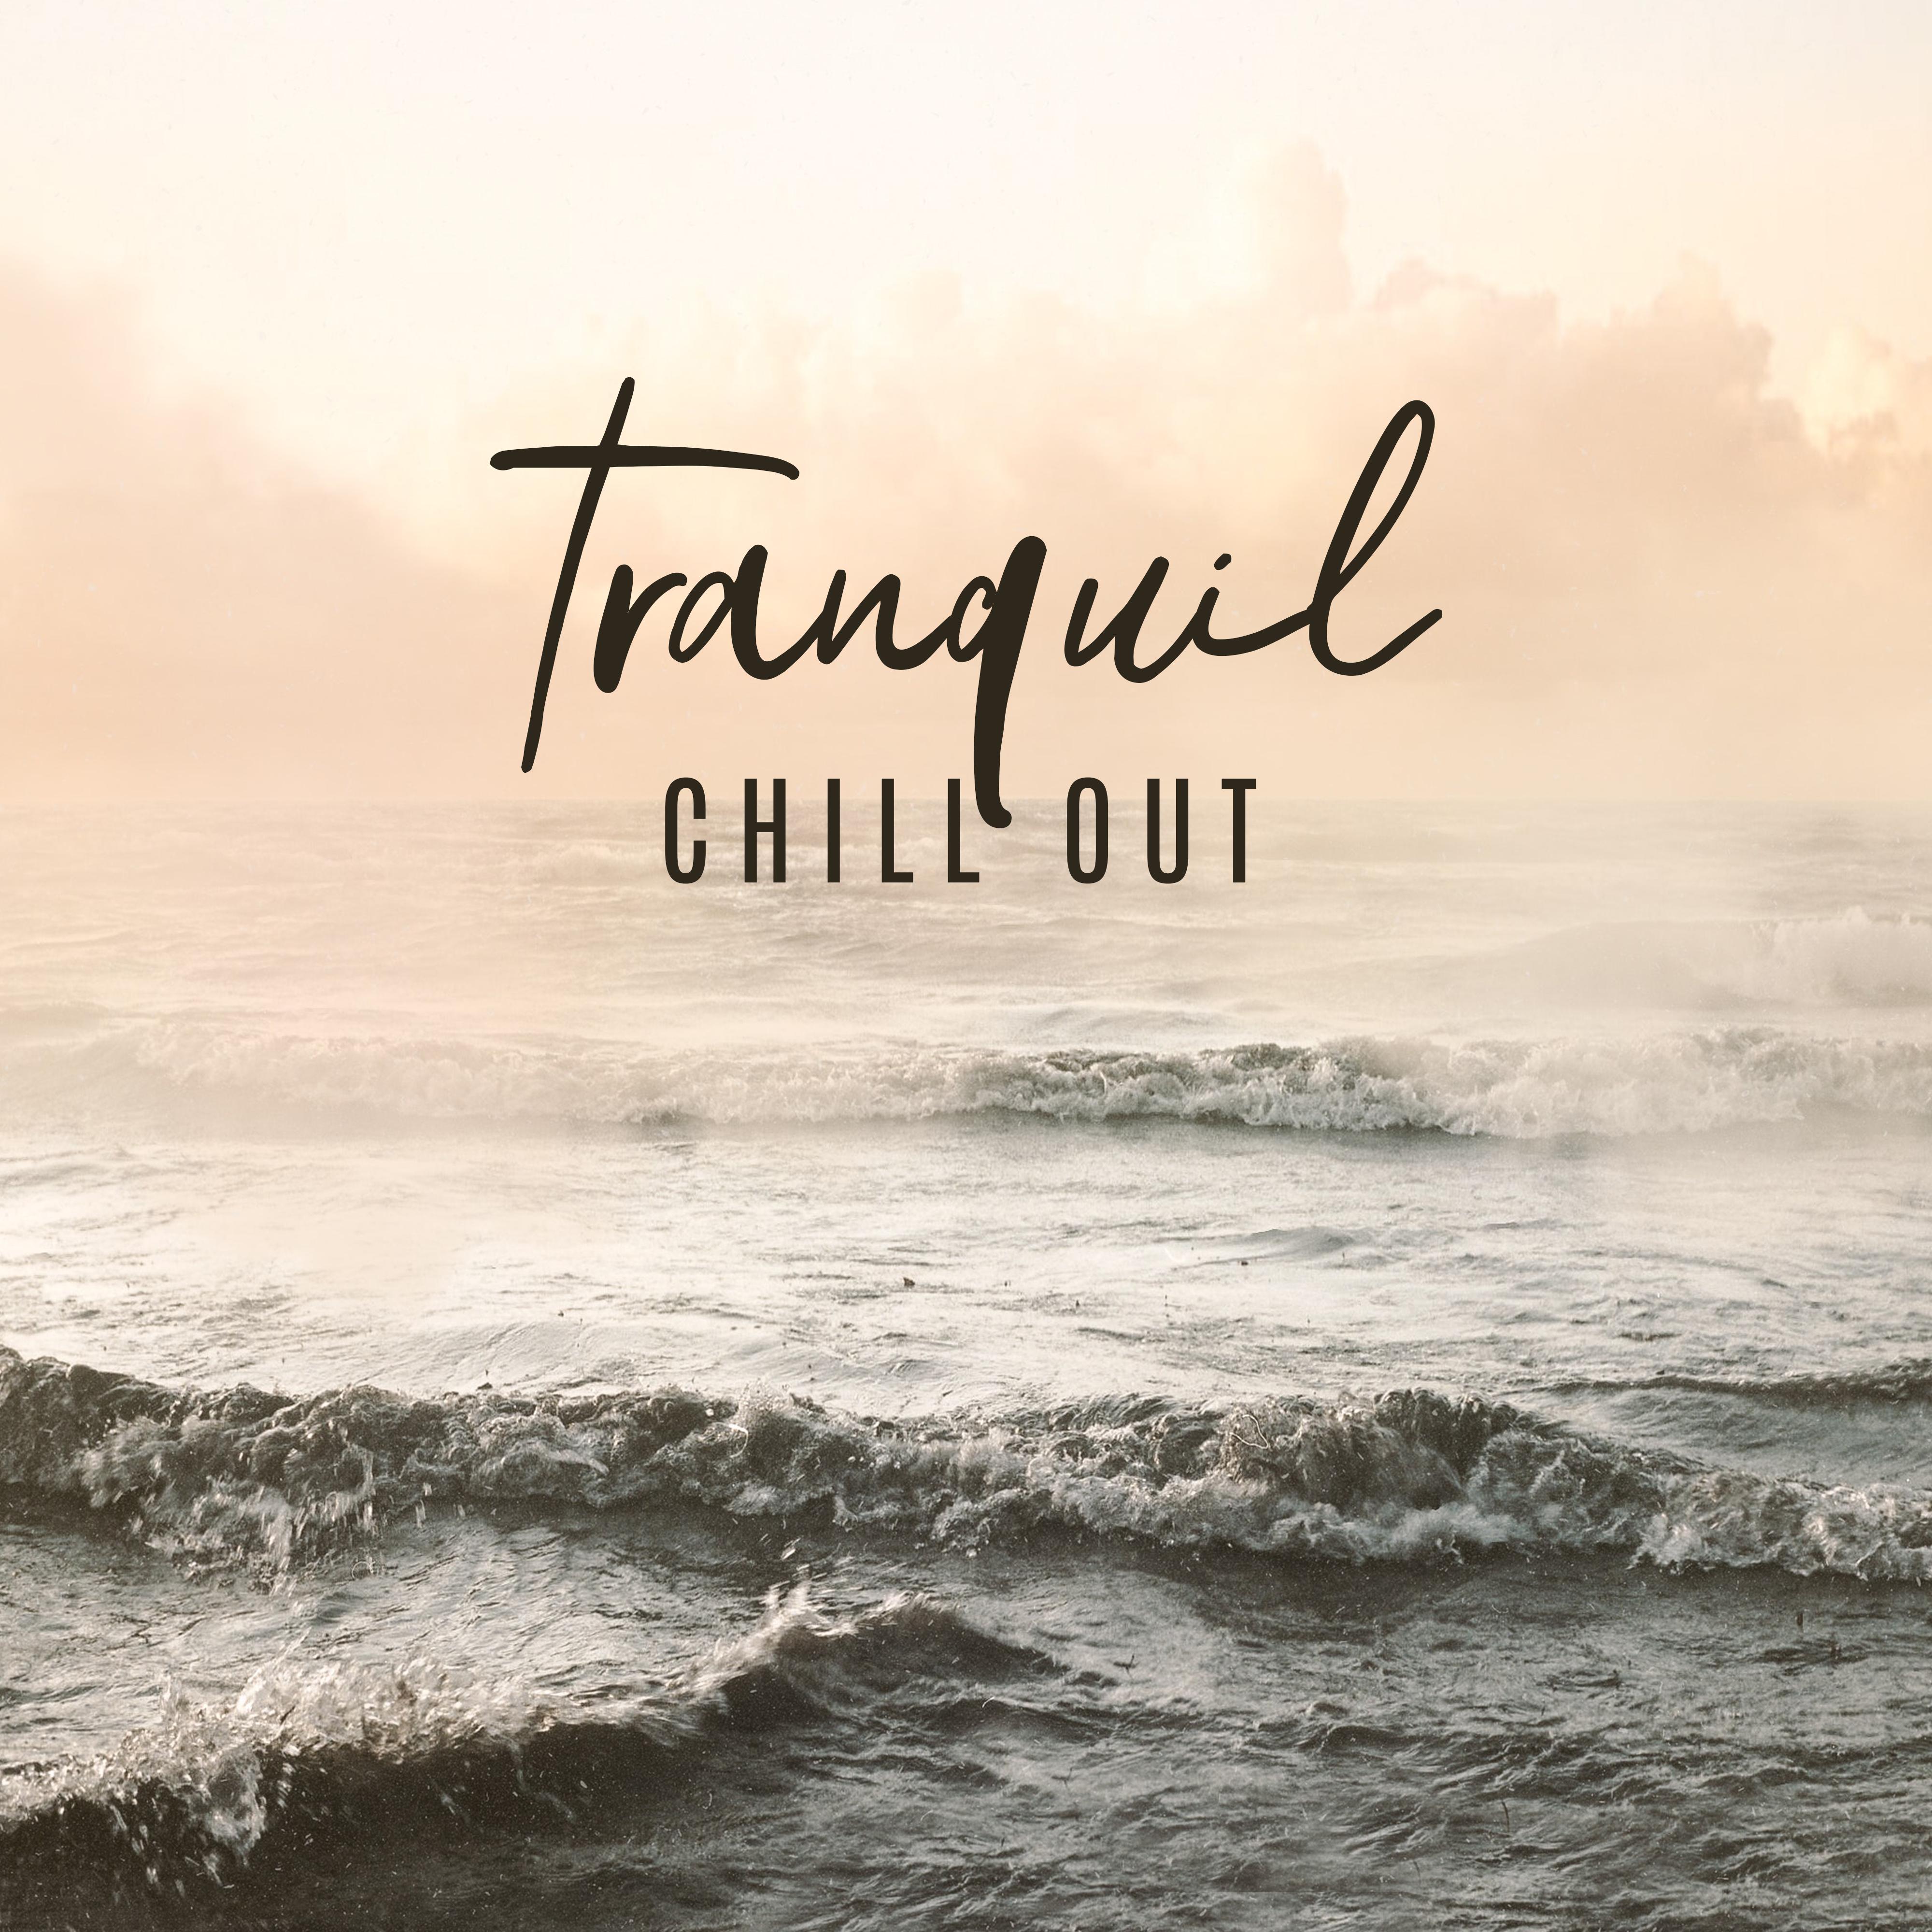 Tranquil Chill Out: Rest, Relax and Unwind with Deeply Relaxing Chillout Music